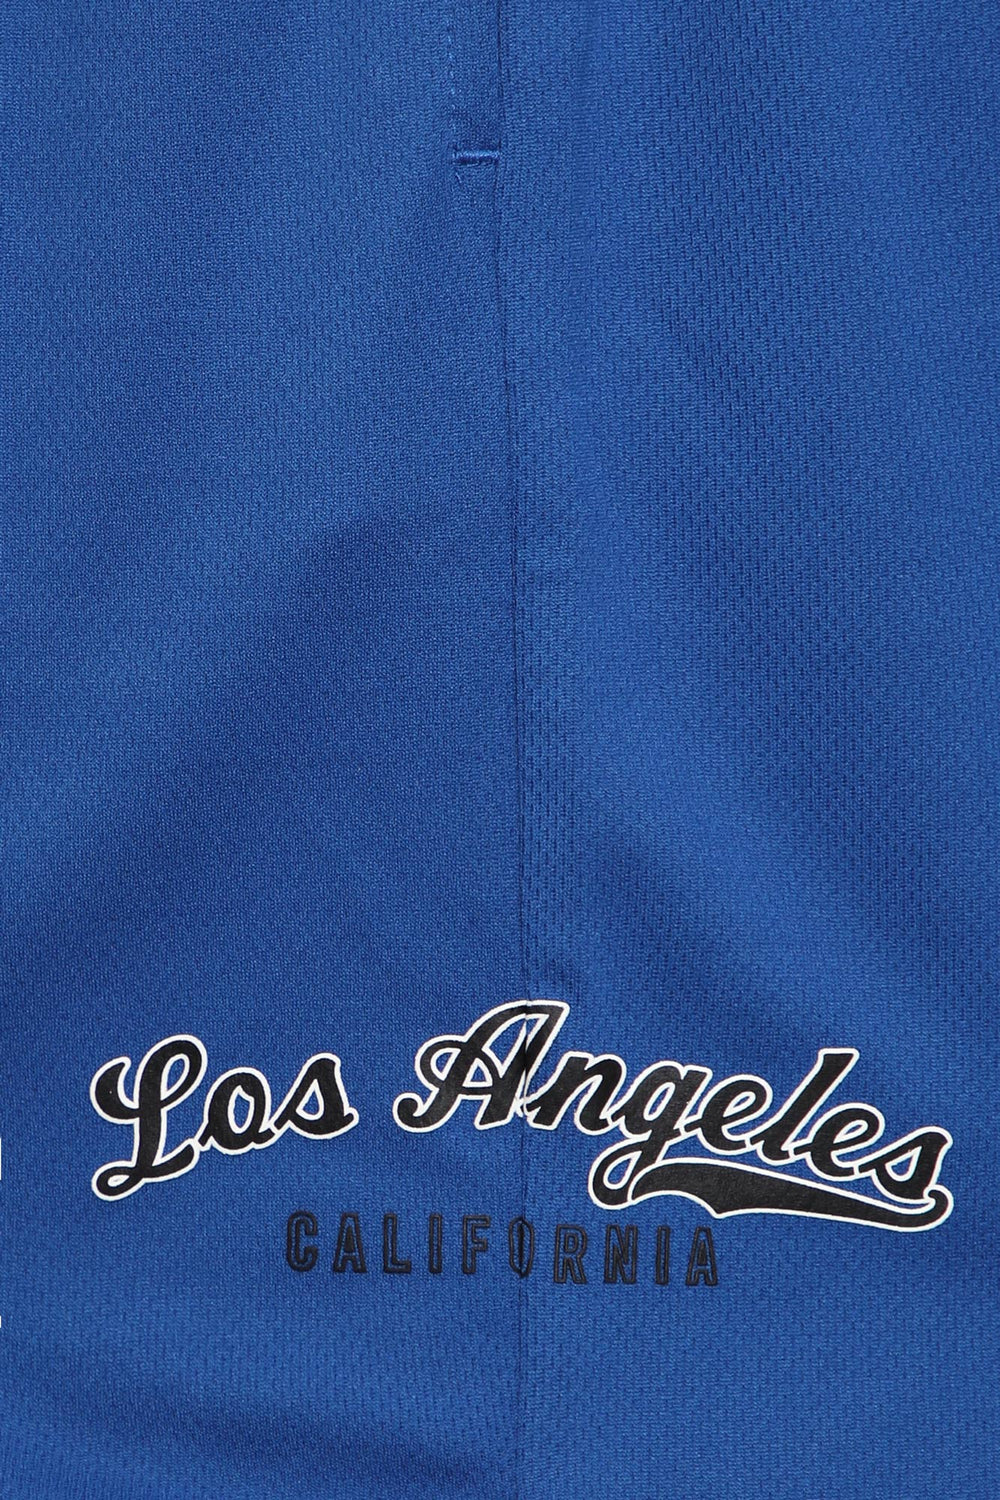 West49 Youth Los Angeles Mesh Shorts West49 Youth Los Angeles Mesh Shorts